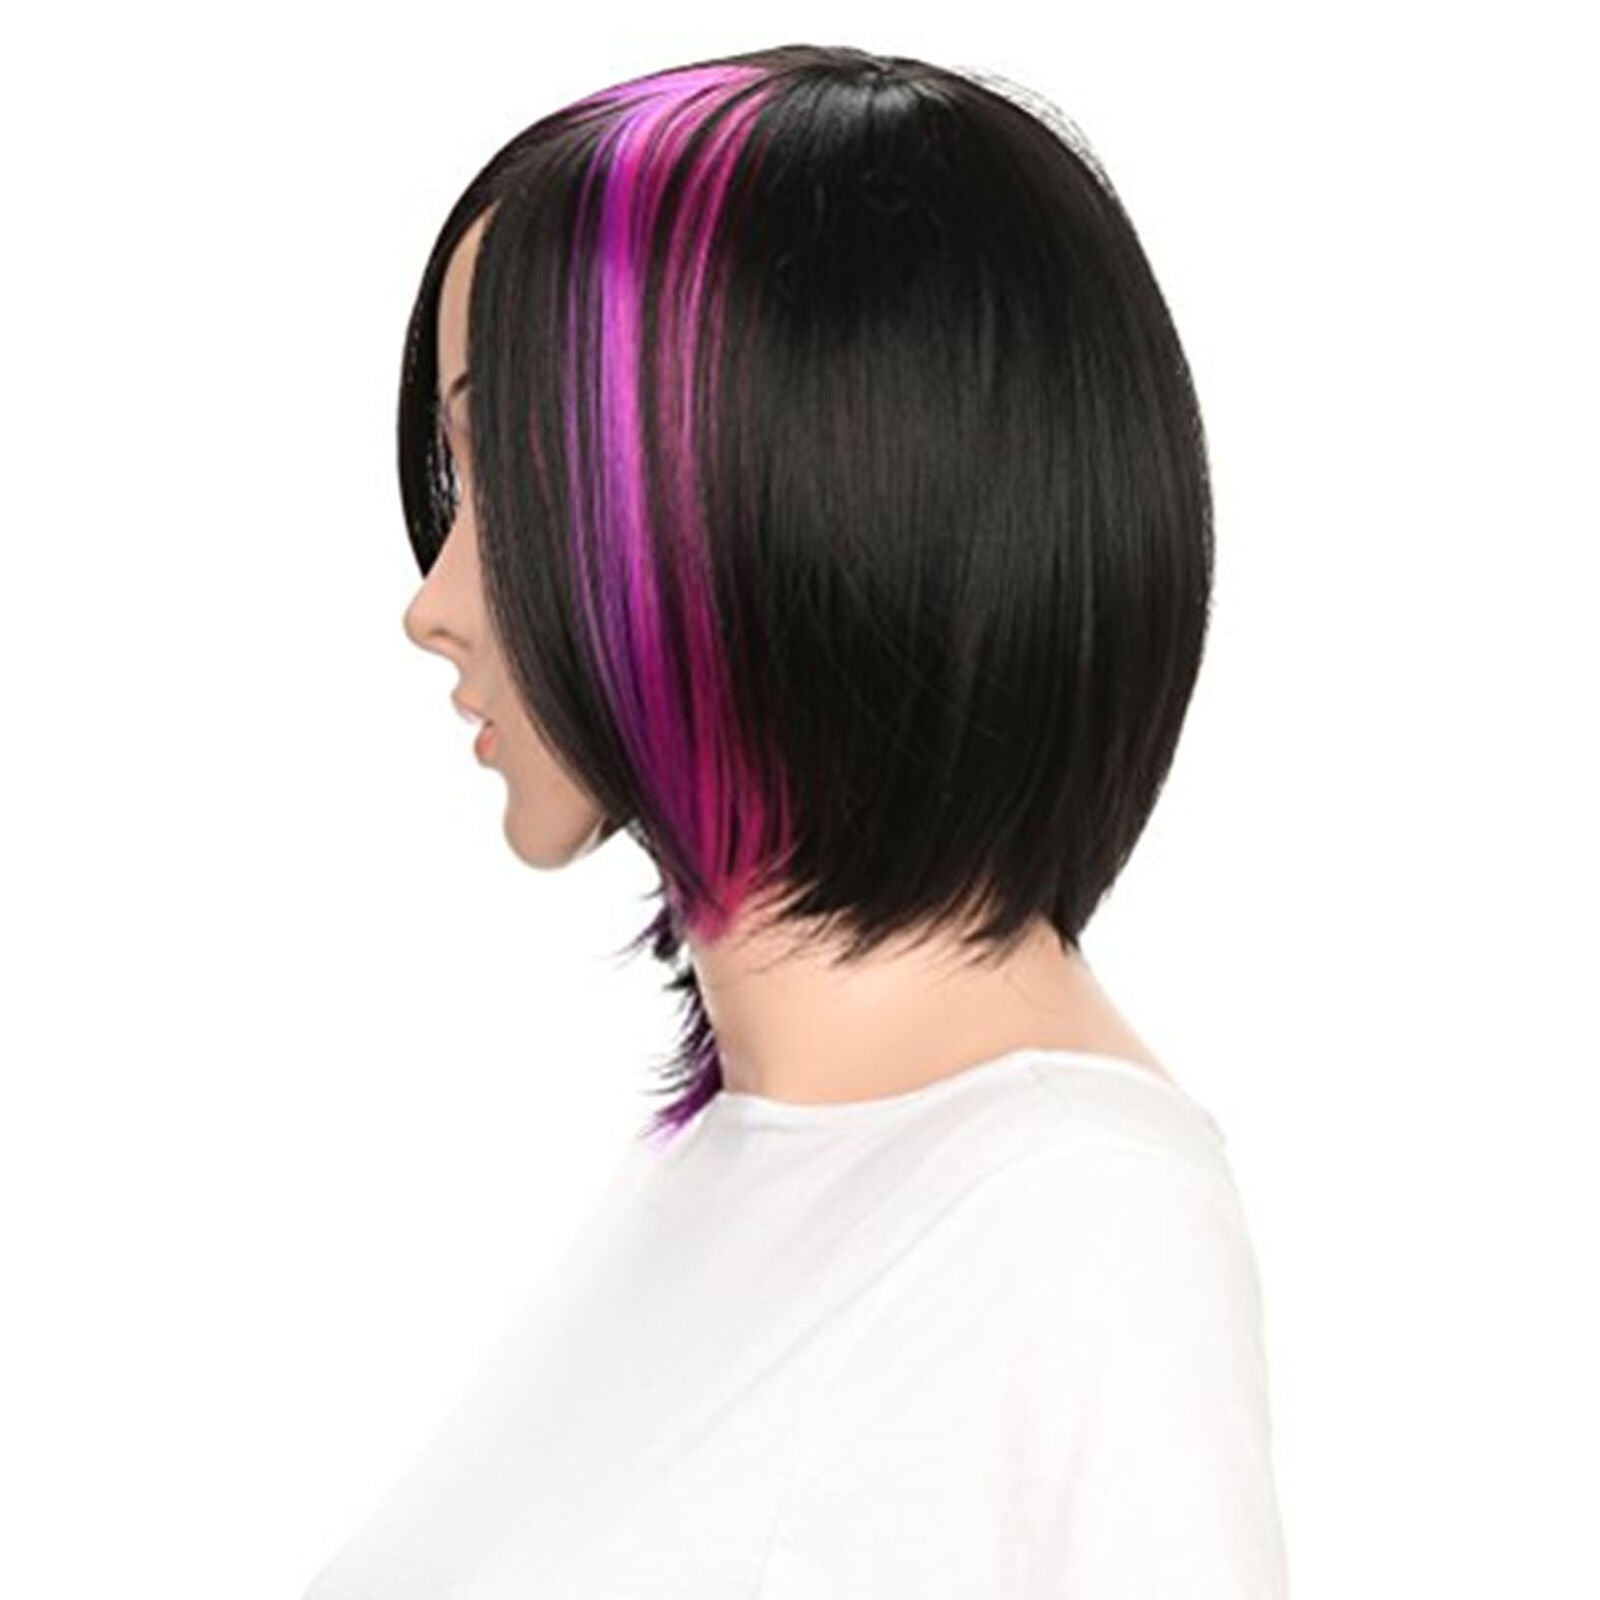 Short Straight Bob Wig Mix Color Highlight Purple Wigs with Side Bangs Wig